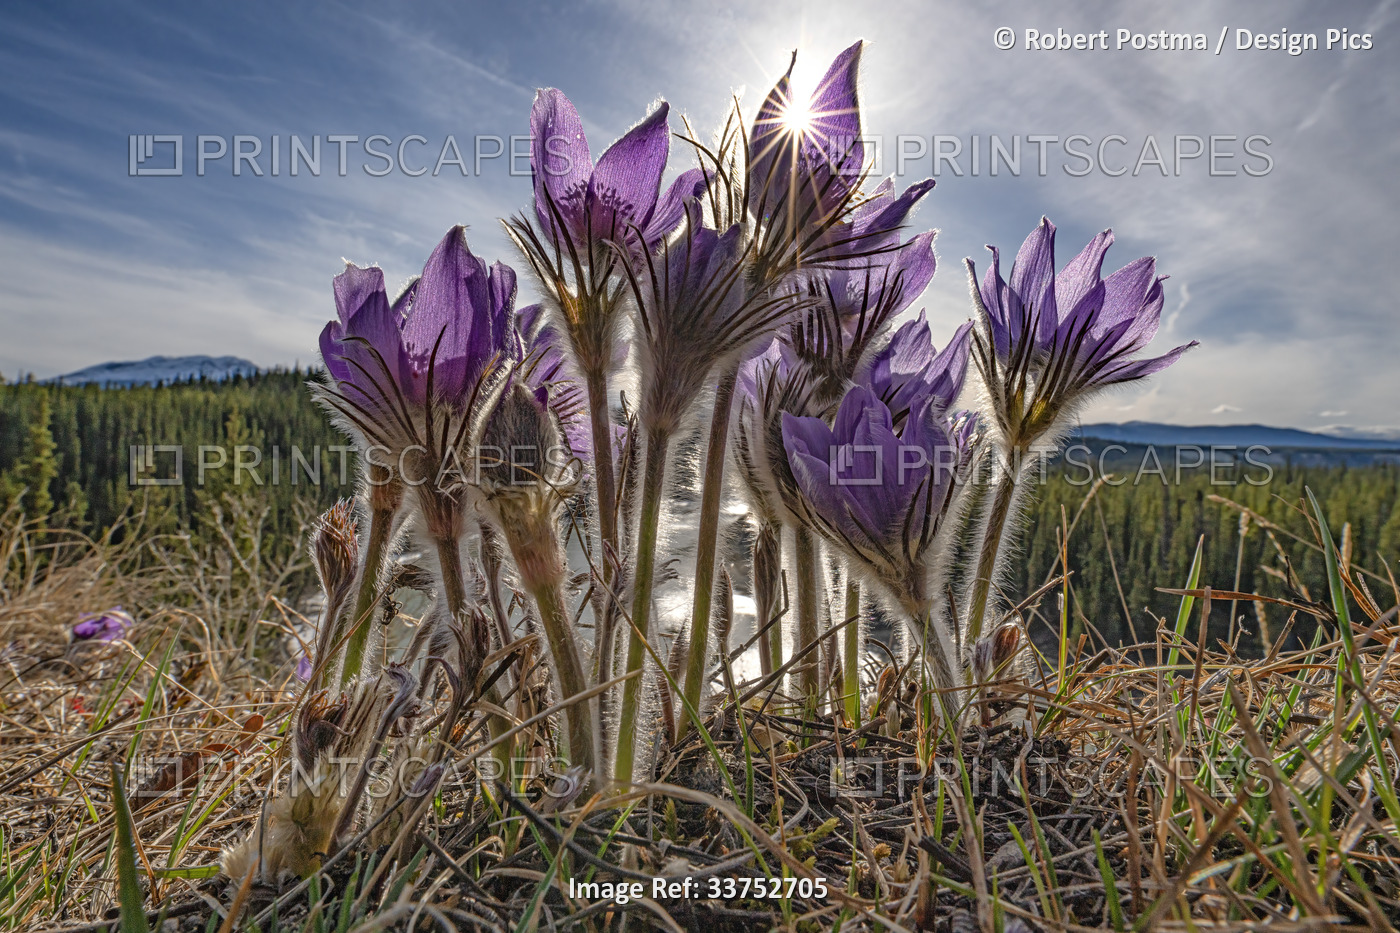 Crocuses bloom in the Yukon wilderness, the first flowers in springtime; ...